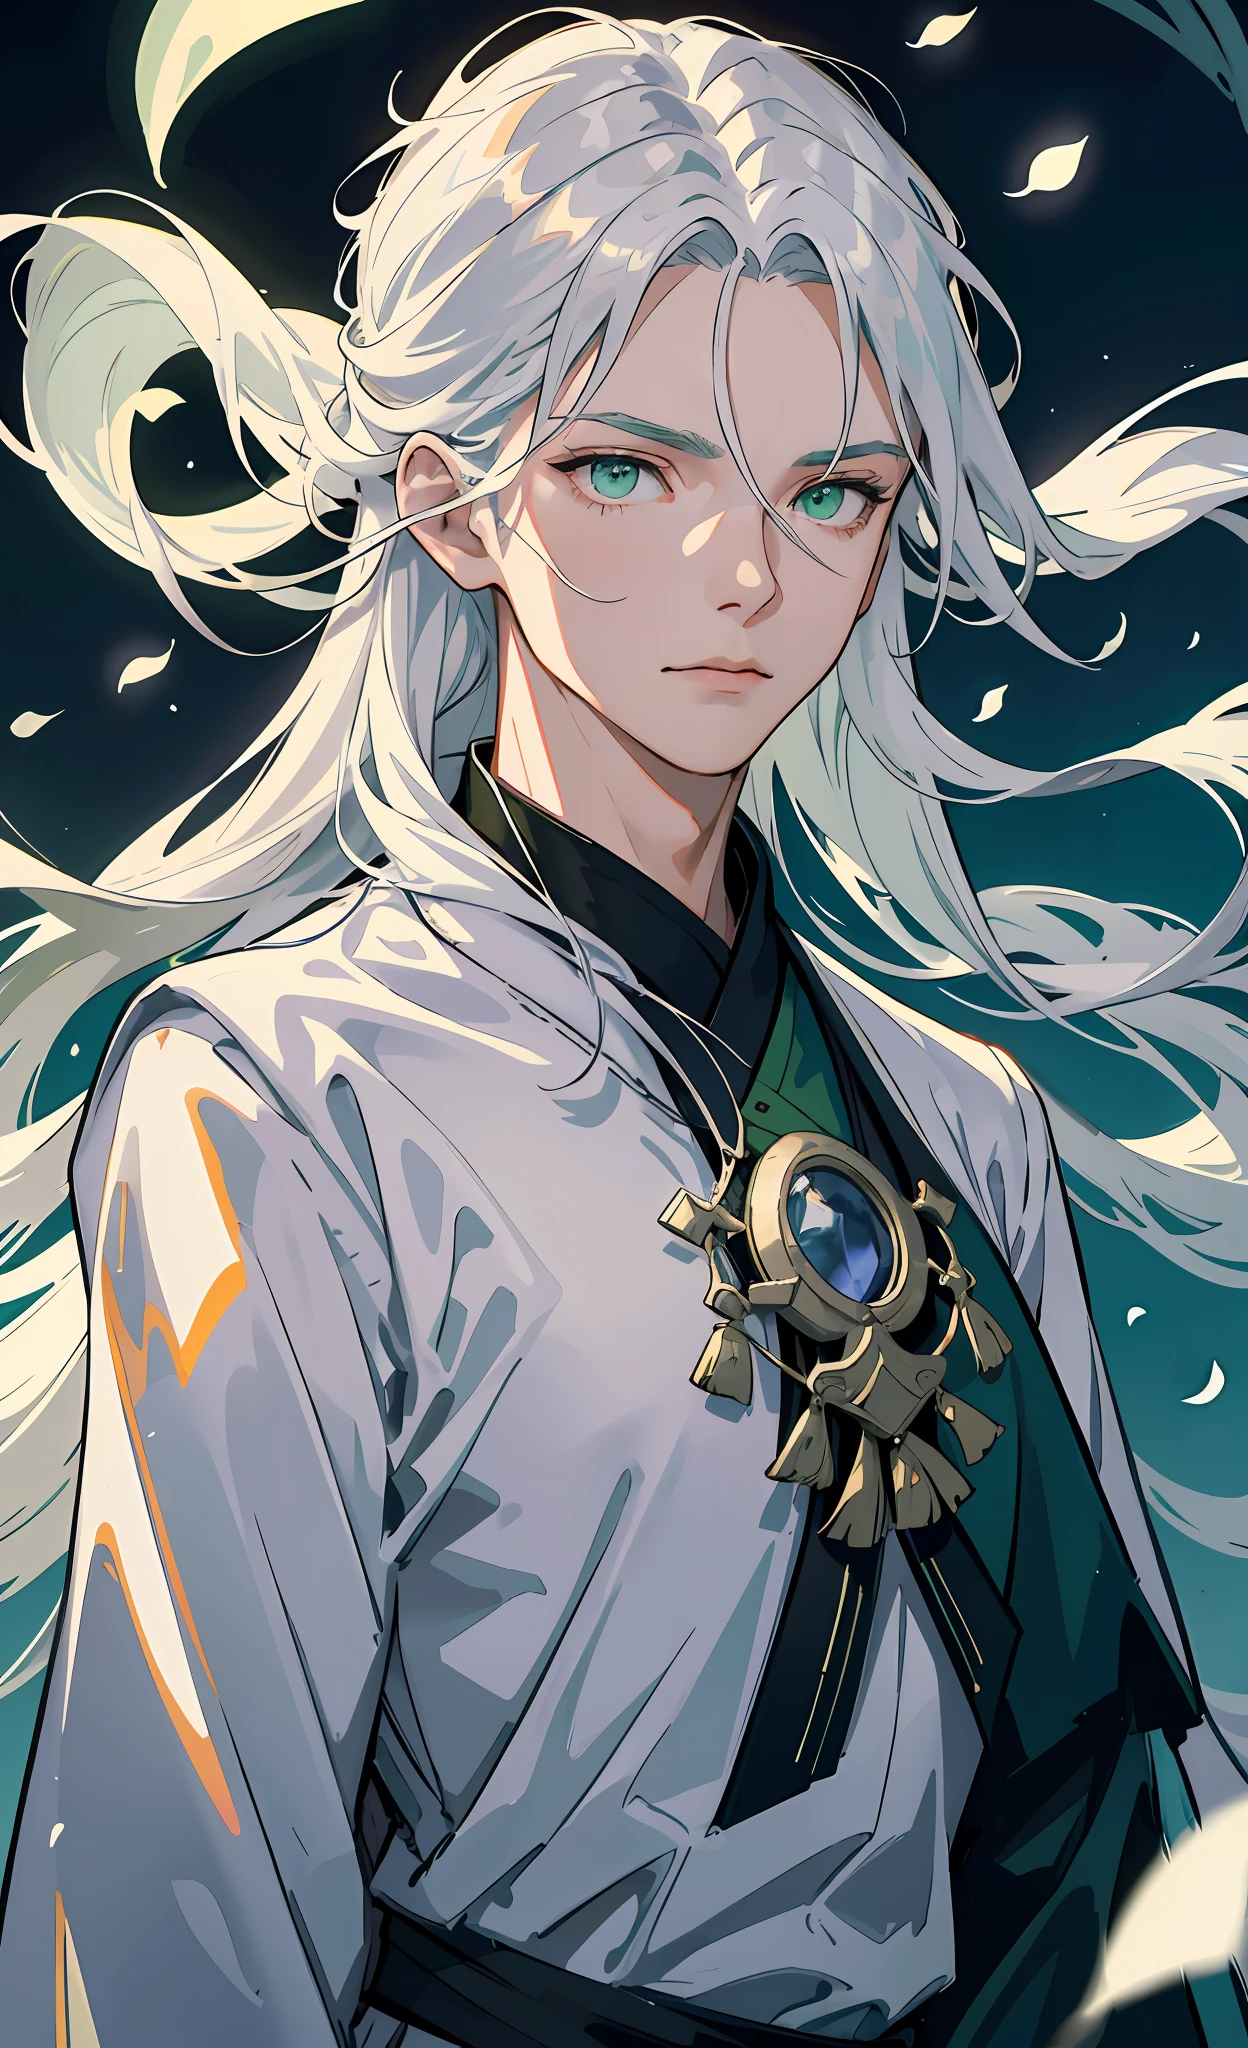 Adult male, strong, green eyes, long silver hair, floating hair, resolute eyes, white fairy robe, gorgeous accessories, magic smoke around him, fov, f/1.8, masterpiece, ancient Chinese architecture, night, petals flying, imperial sword flying, front portrait shot, side lighting, moonlight shining on people, 8K, eyes looking directly at the screen